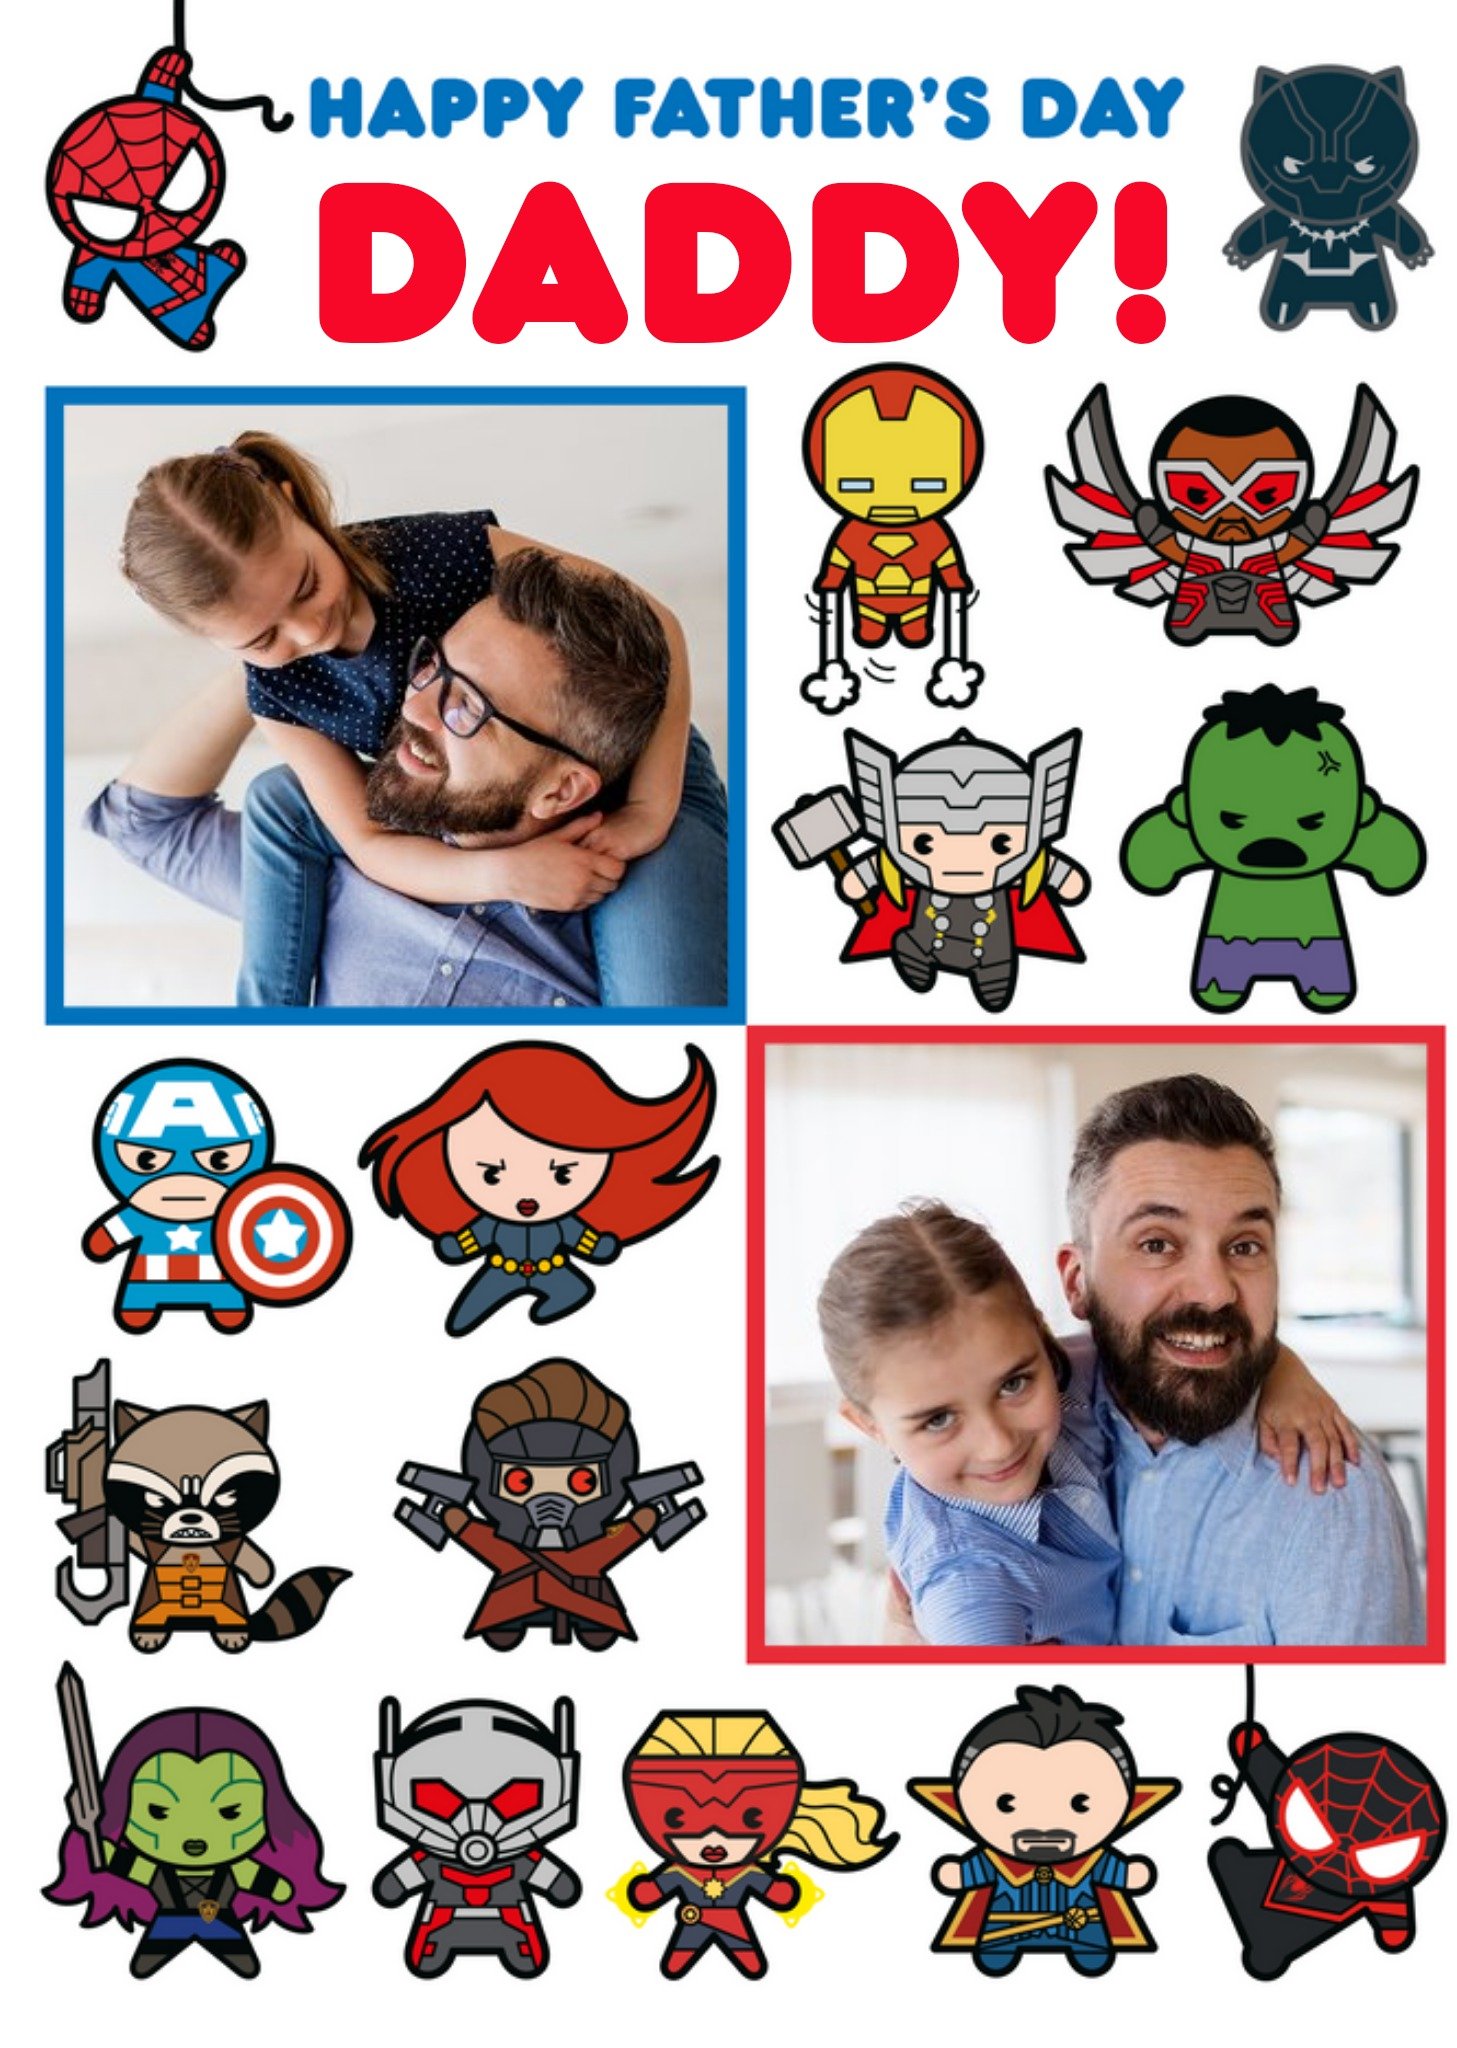 Disney Marvel Comics Heroes Photo Upload Father's Day Card, Large